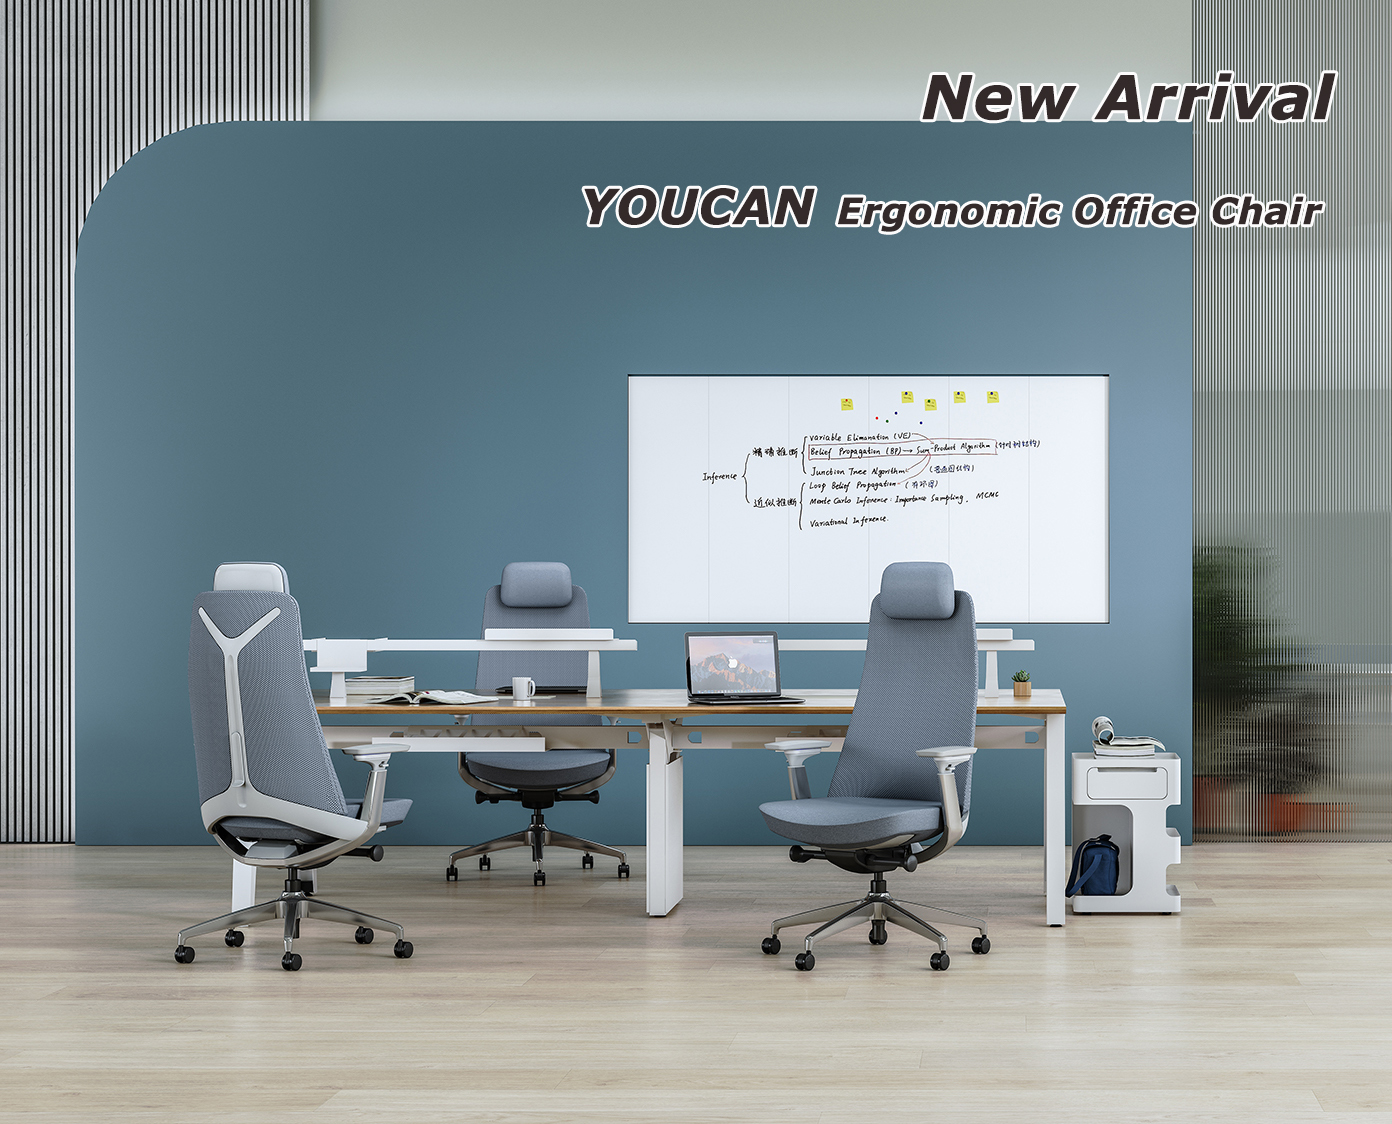 New Arrival——YOUCAN Ergonomic Office Chair